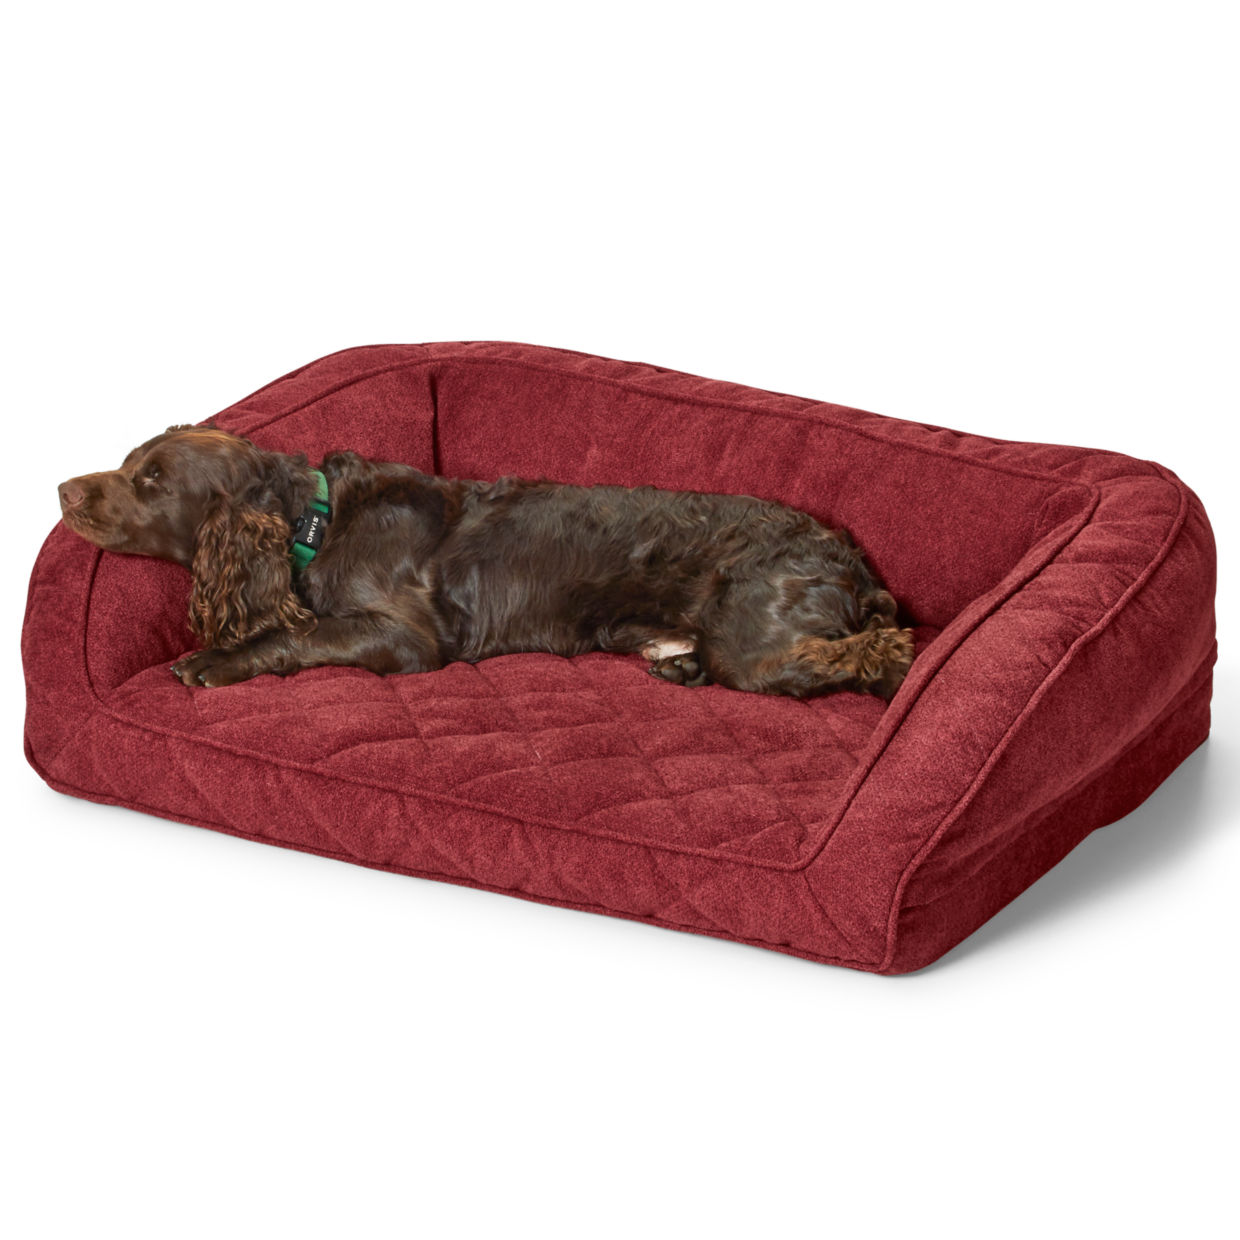 Image of Orvis AirFoam Bolster Dog Bed